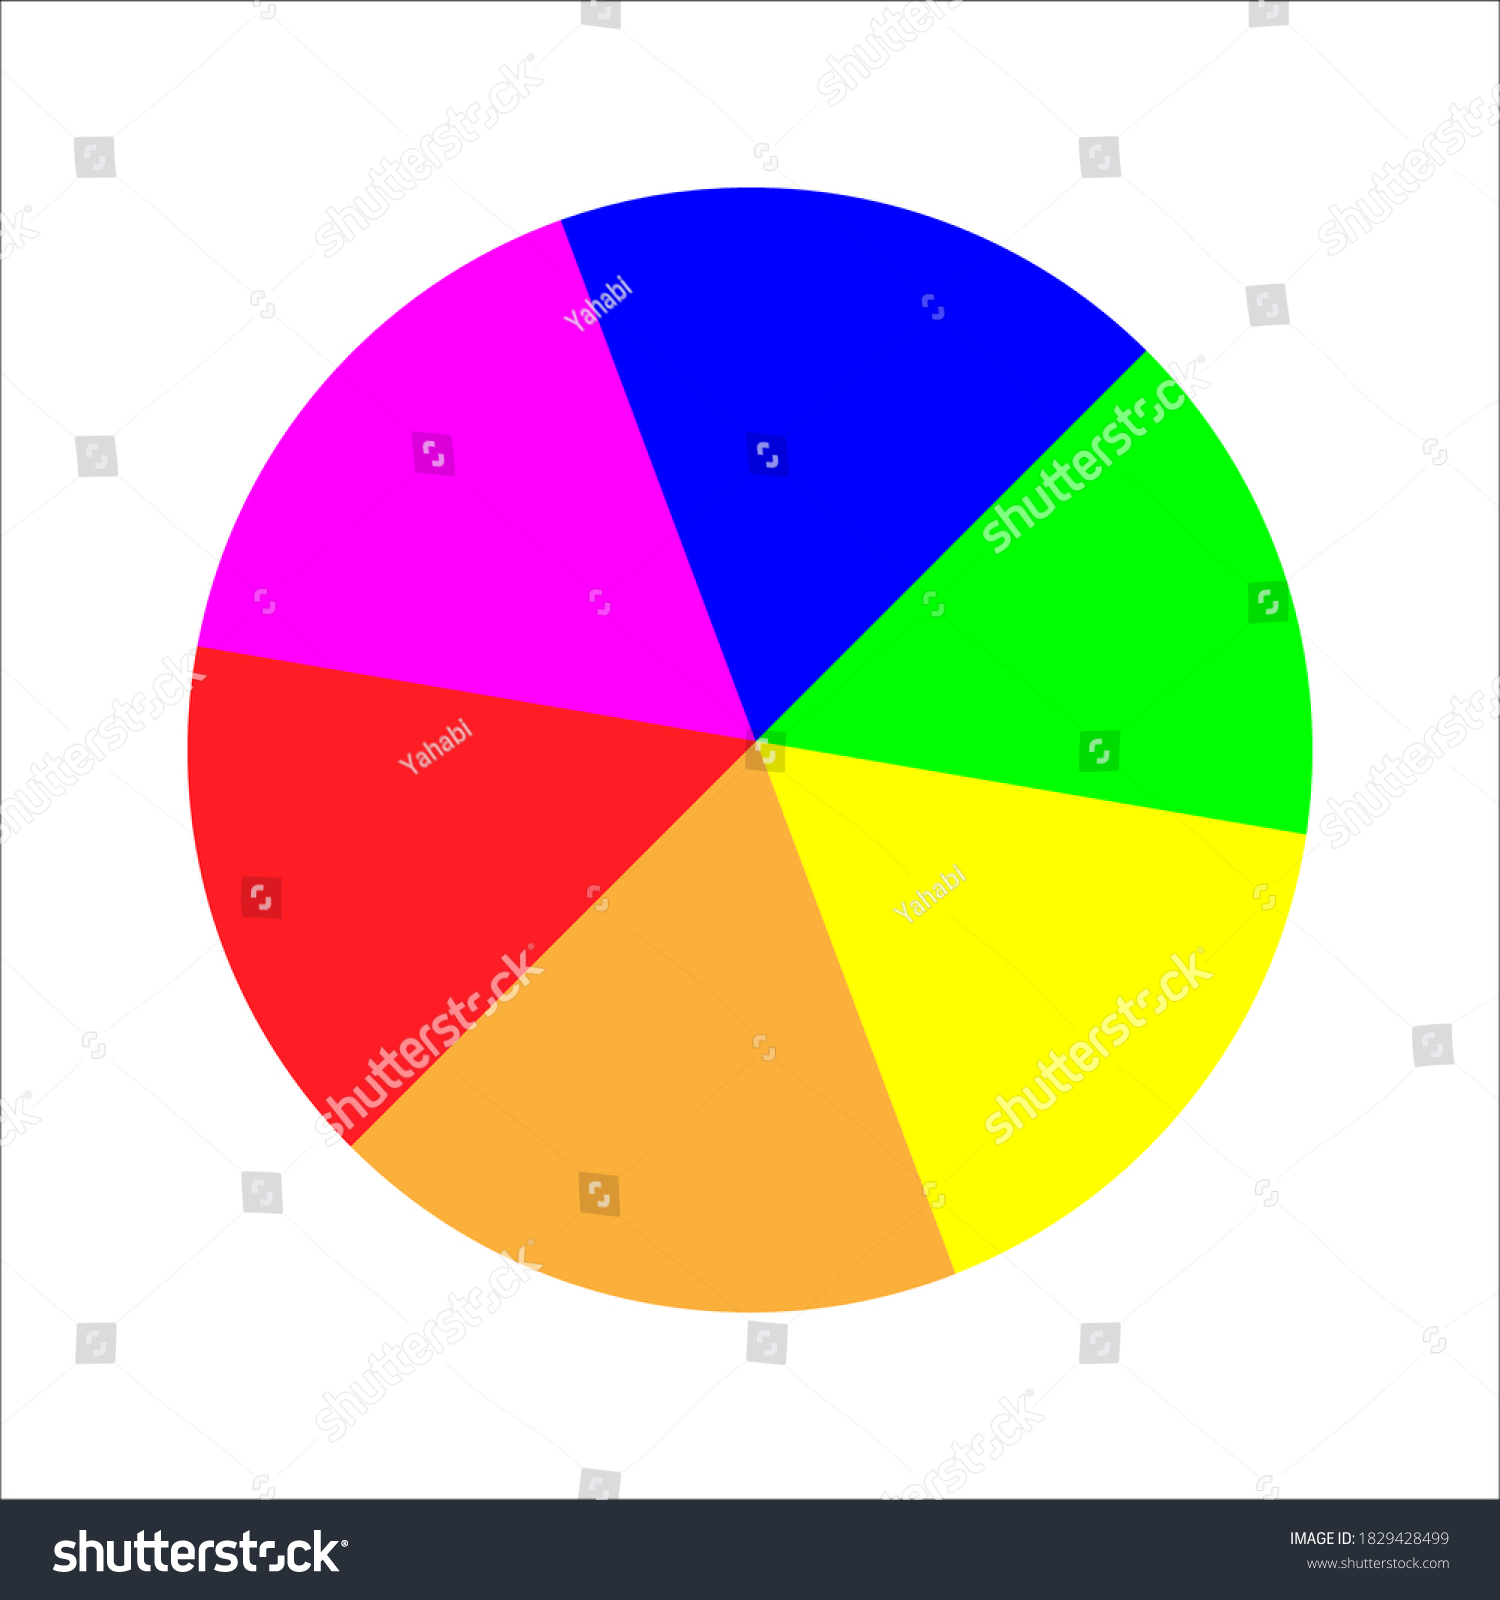 pie-chart-diagram-multiple-angles-angles-stock-vector-royalty-free-1829428499-shutterstock